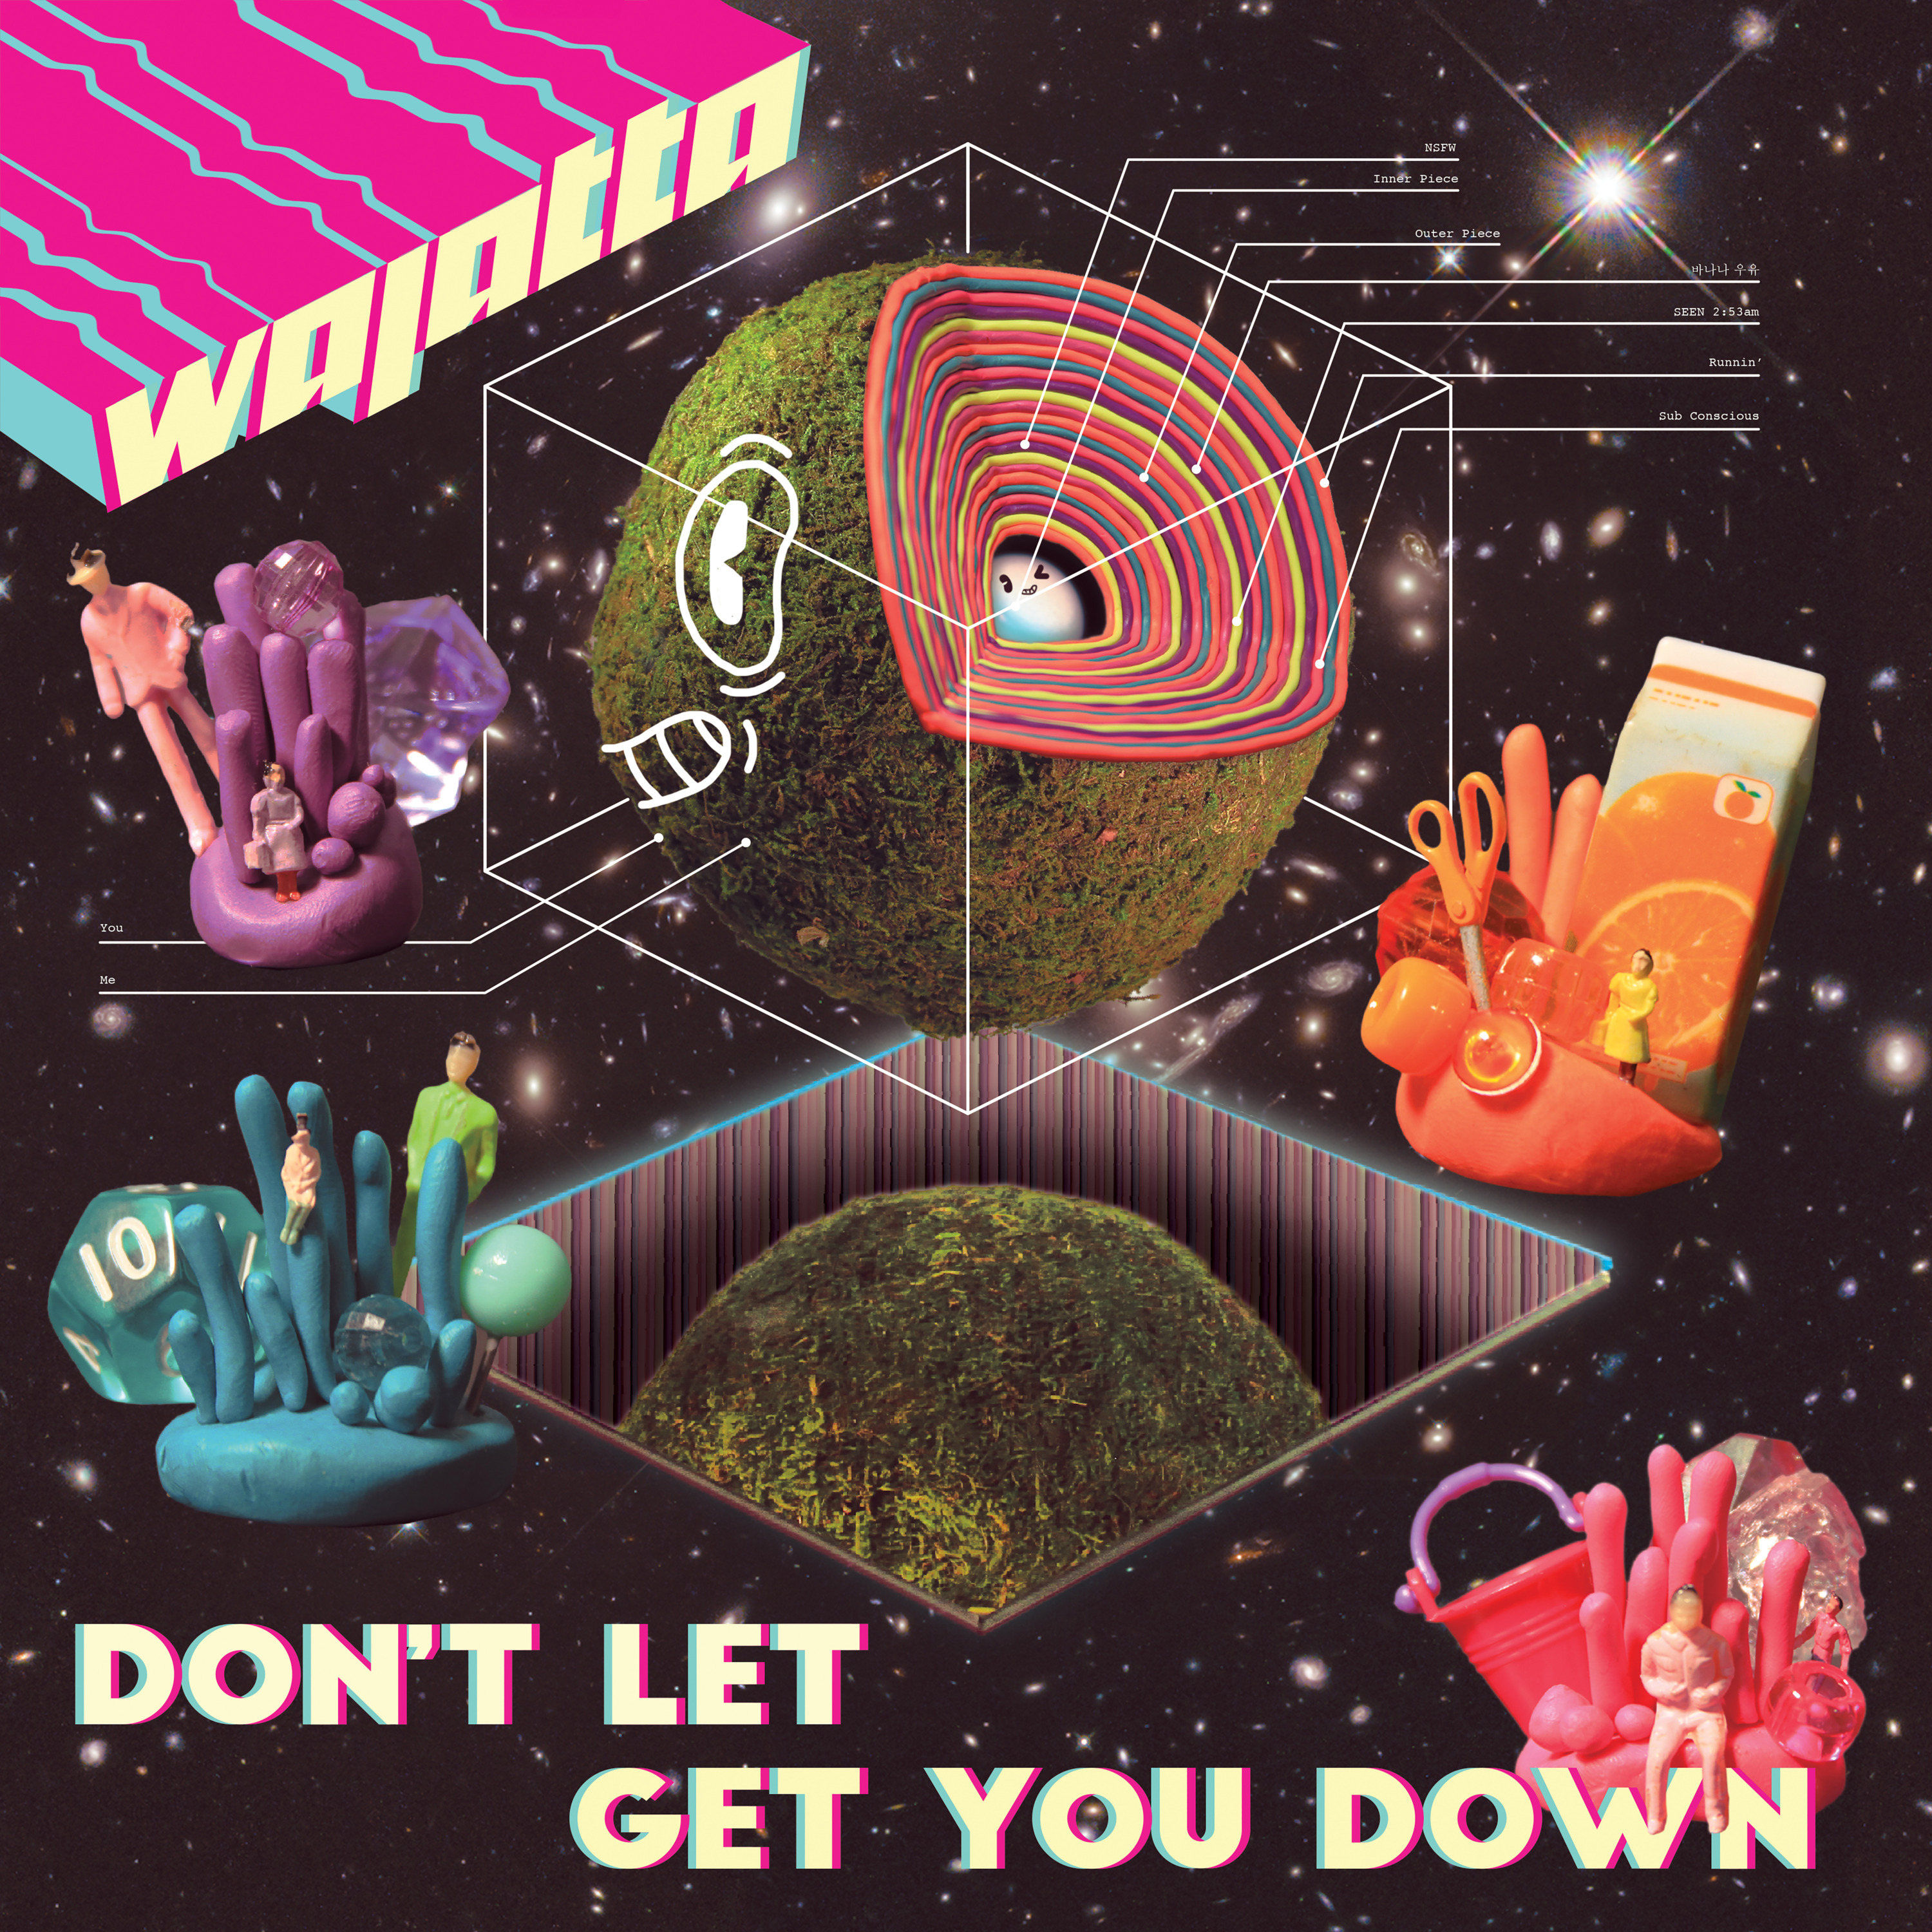 Wajatta - Don't Let Get You Down - CD